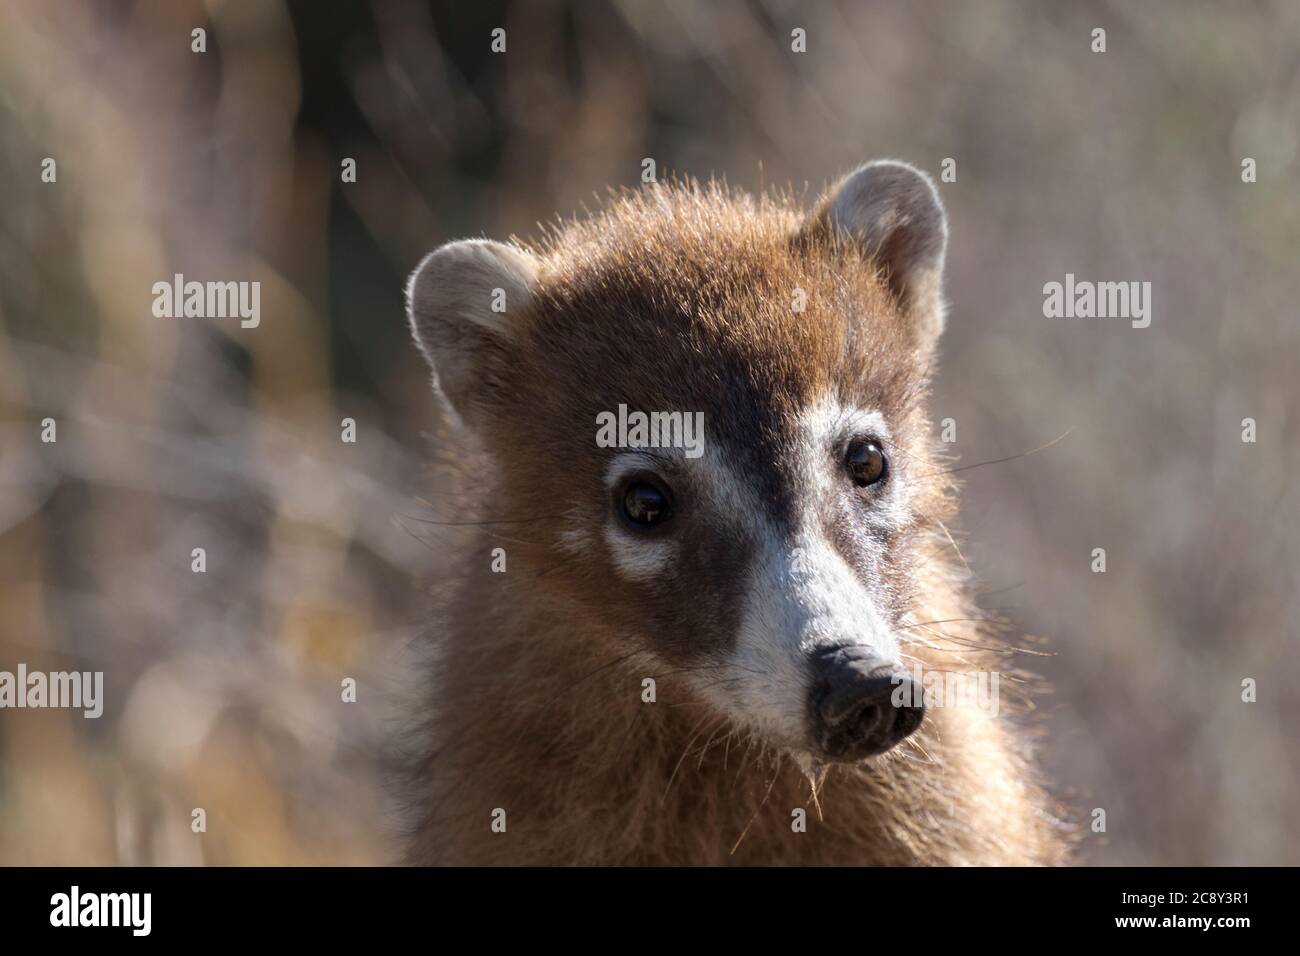 Distinctive wild coatimundi, or coati, lifts head from drinking for perfect sunlit portrait with water dripping from its snout. Stock Photo